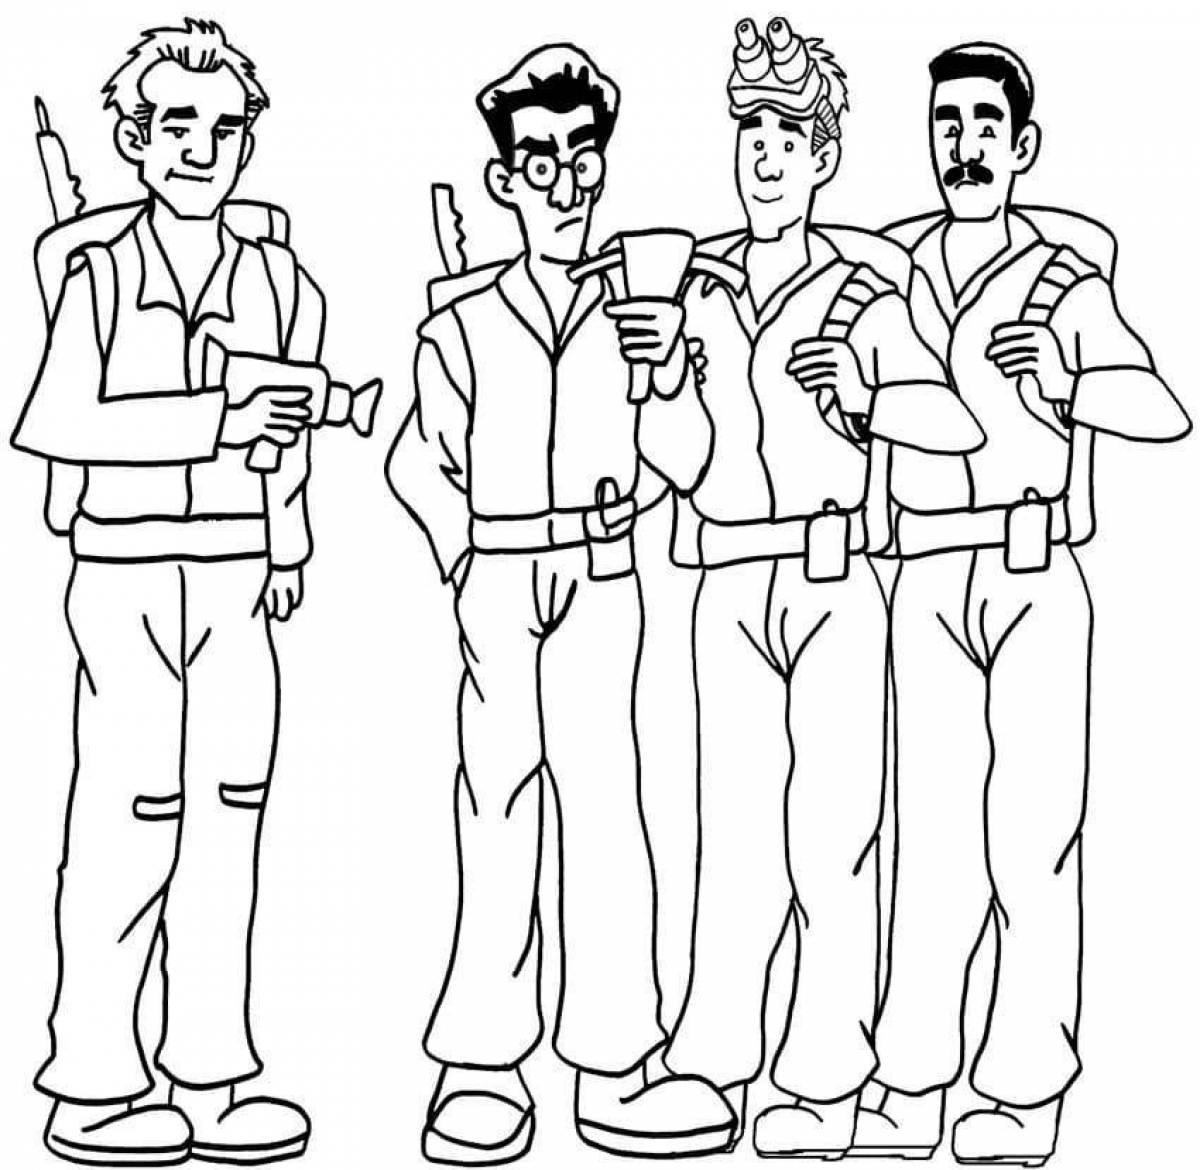 Glowing Ghostbusters coloring page